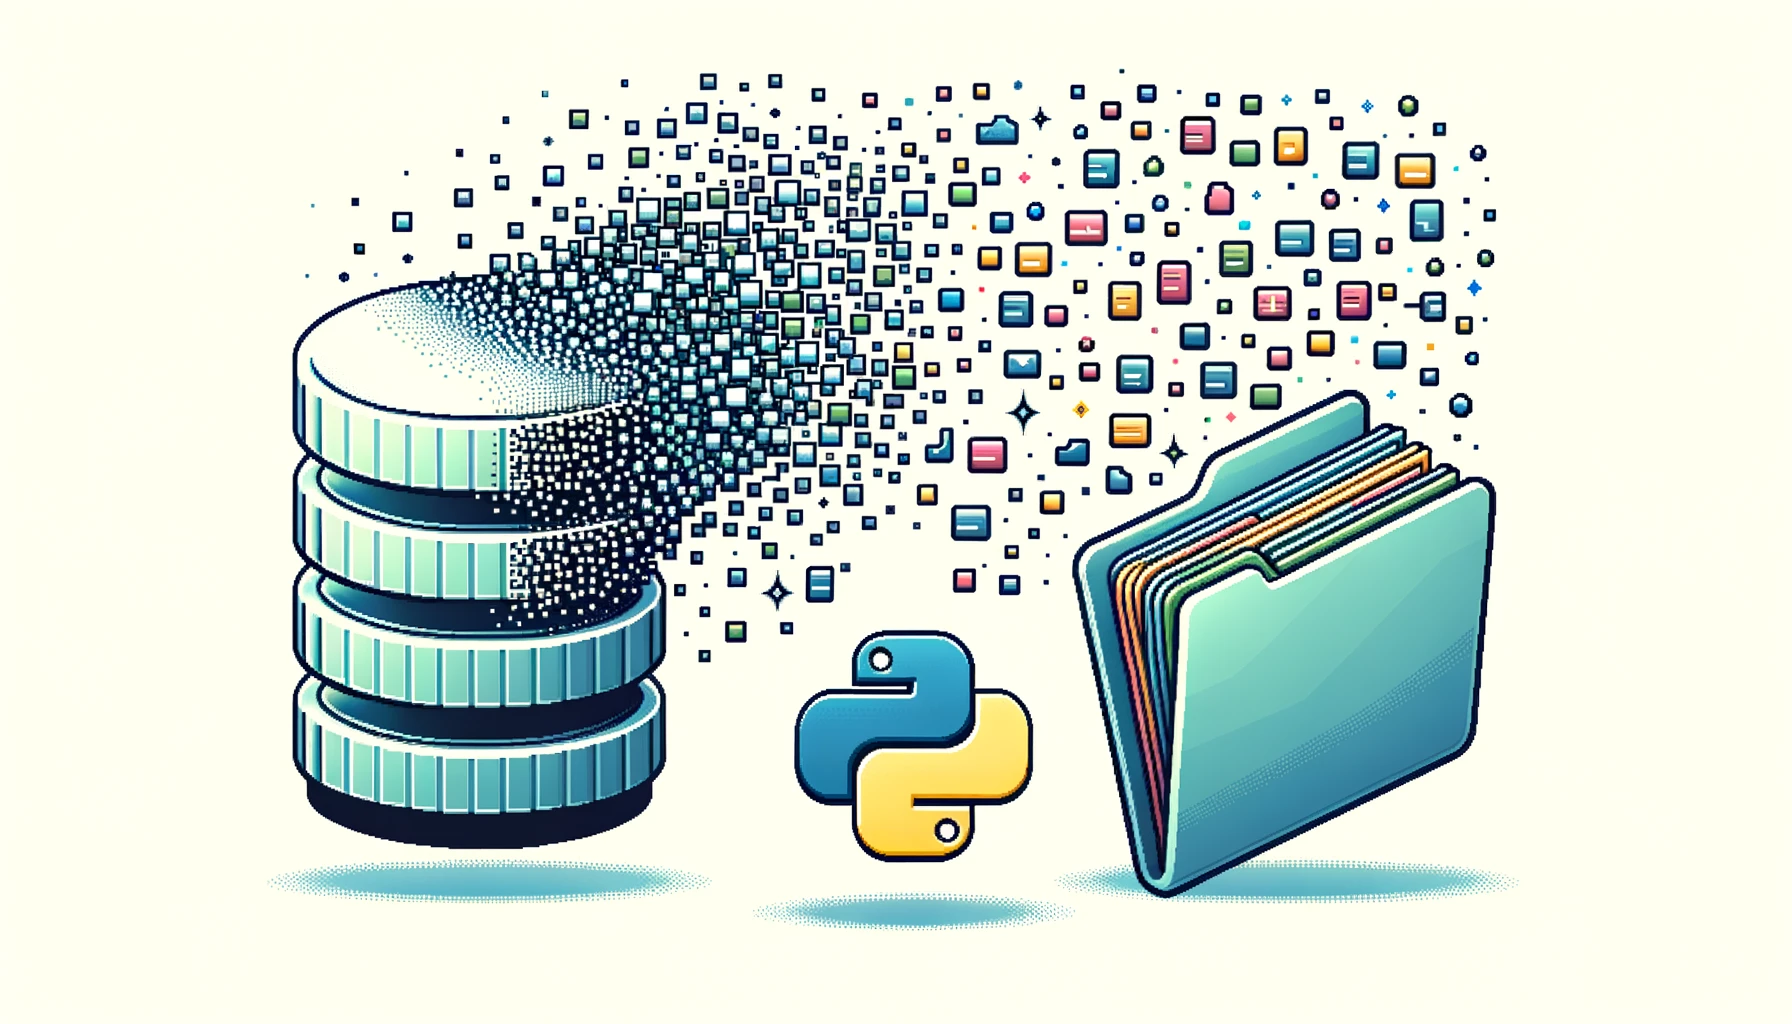 Vector: On the left, a MySQL database icon begins to pixelate and break apart. The disintegrated pixels move towards the right and reassemble to form a directory folder icon. From this folder, multiple file icons are emerging. Floating between the database and the directory are snippets of Python code, acting as a bridge. Above the entire scene, a softly glowing Python logo illuminates everything.